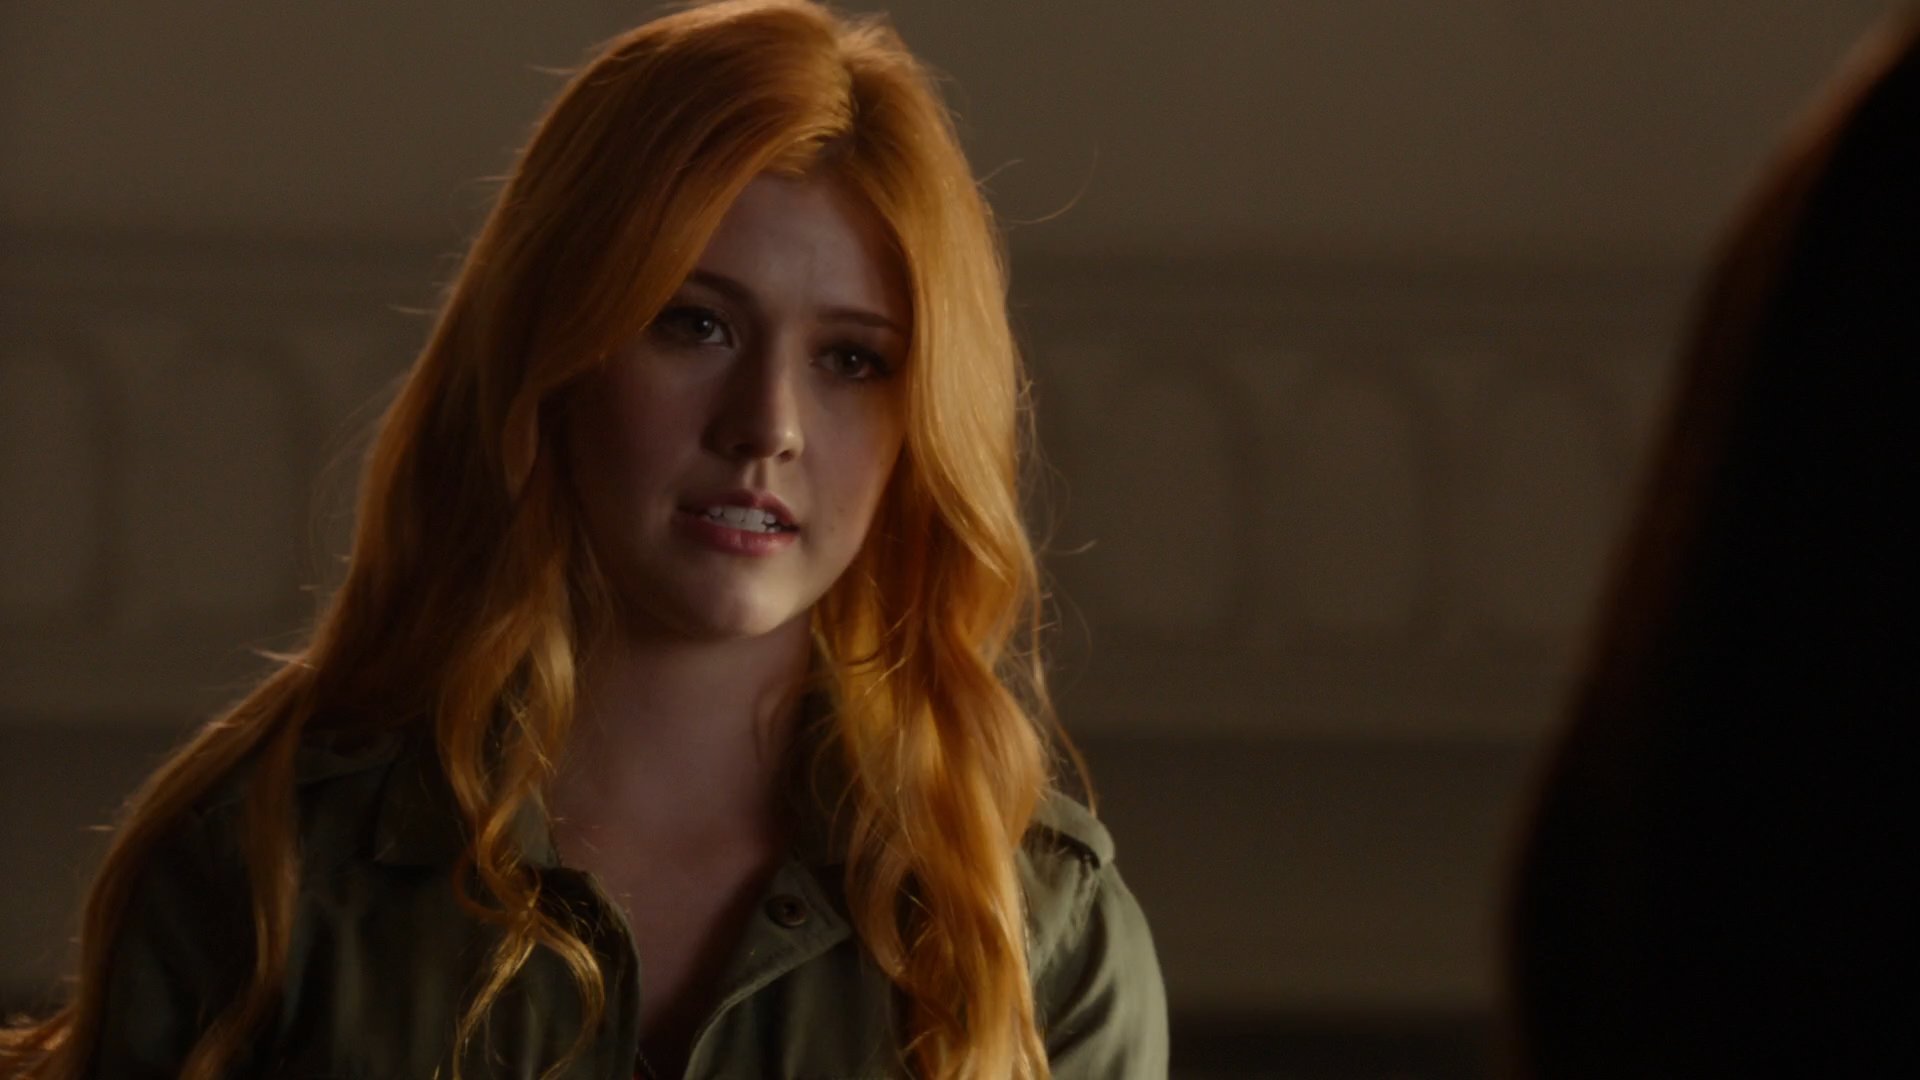 Clary dp compilation